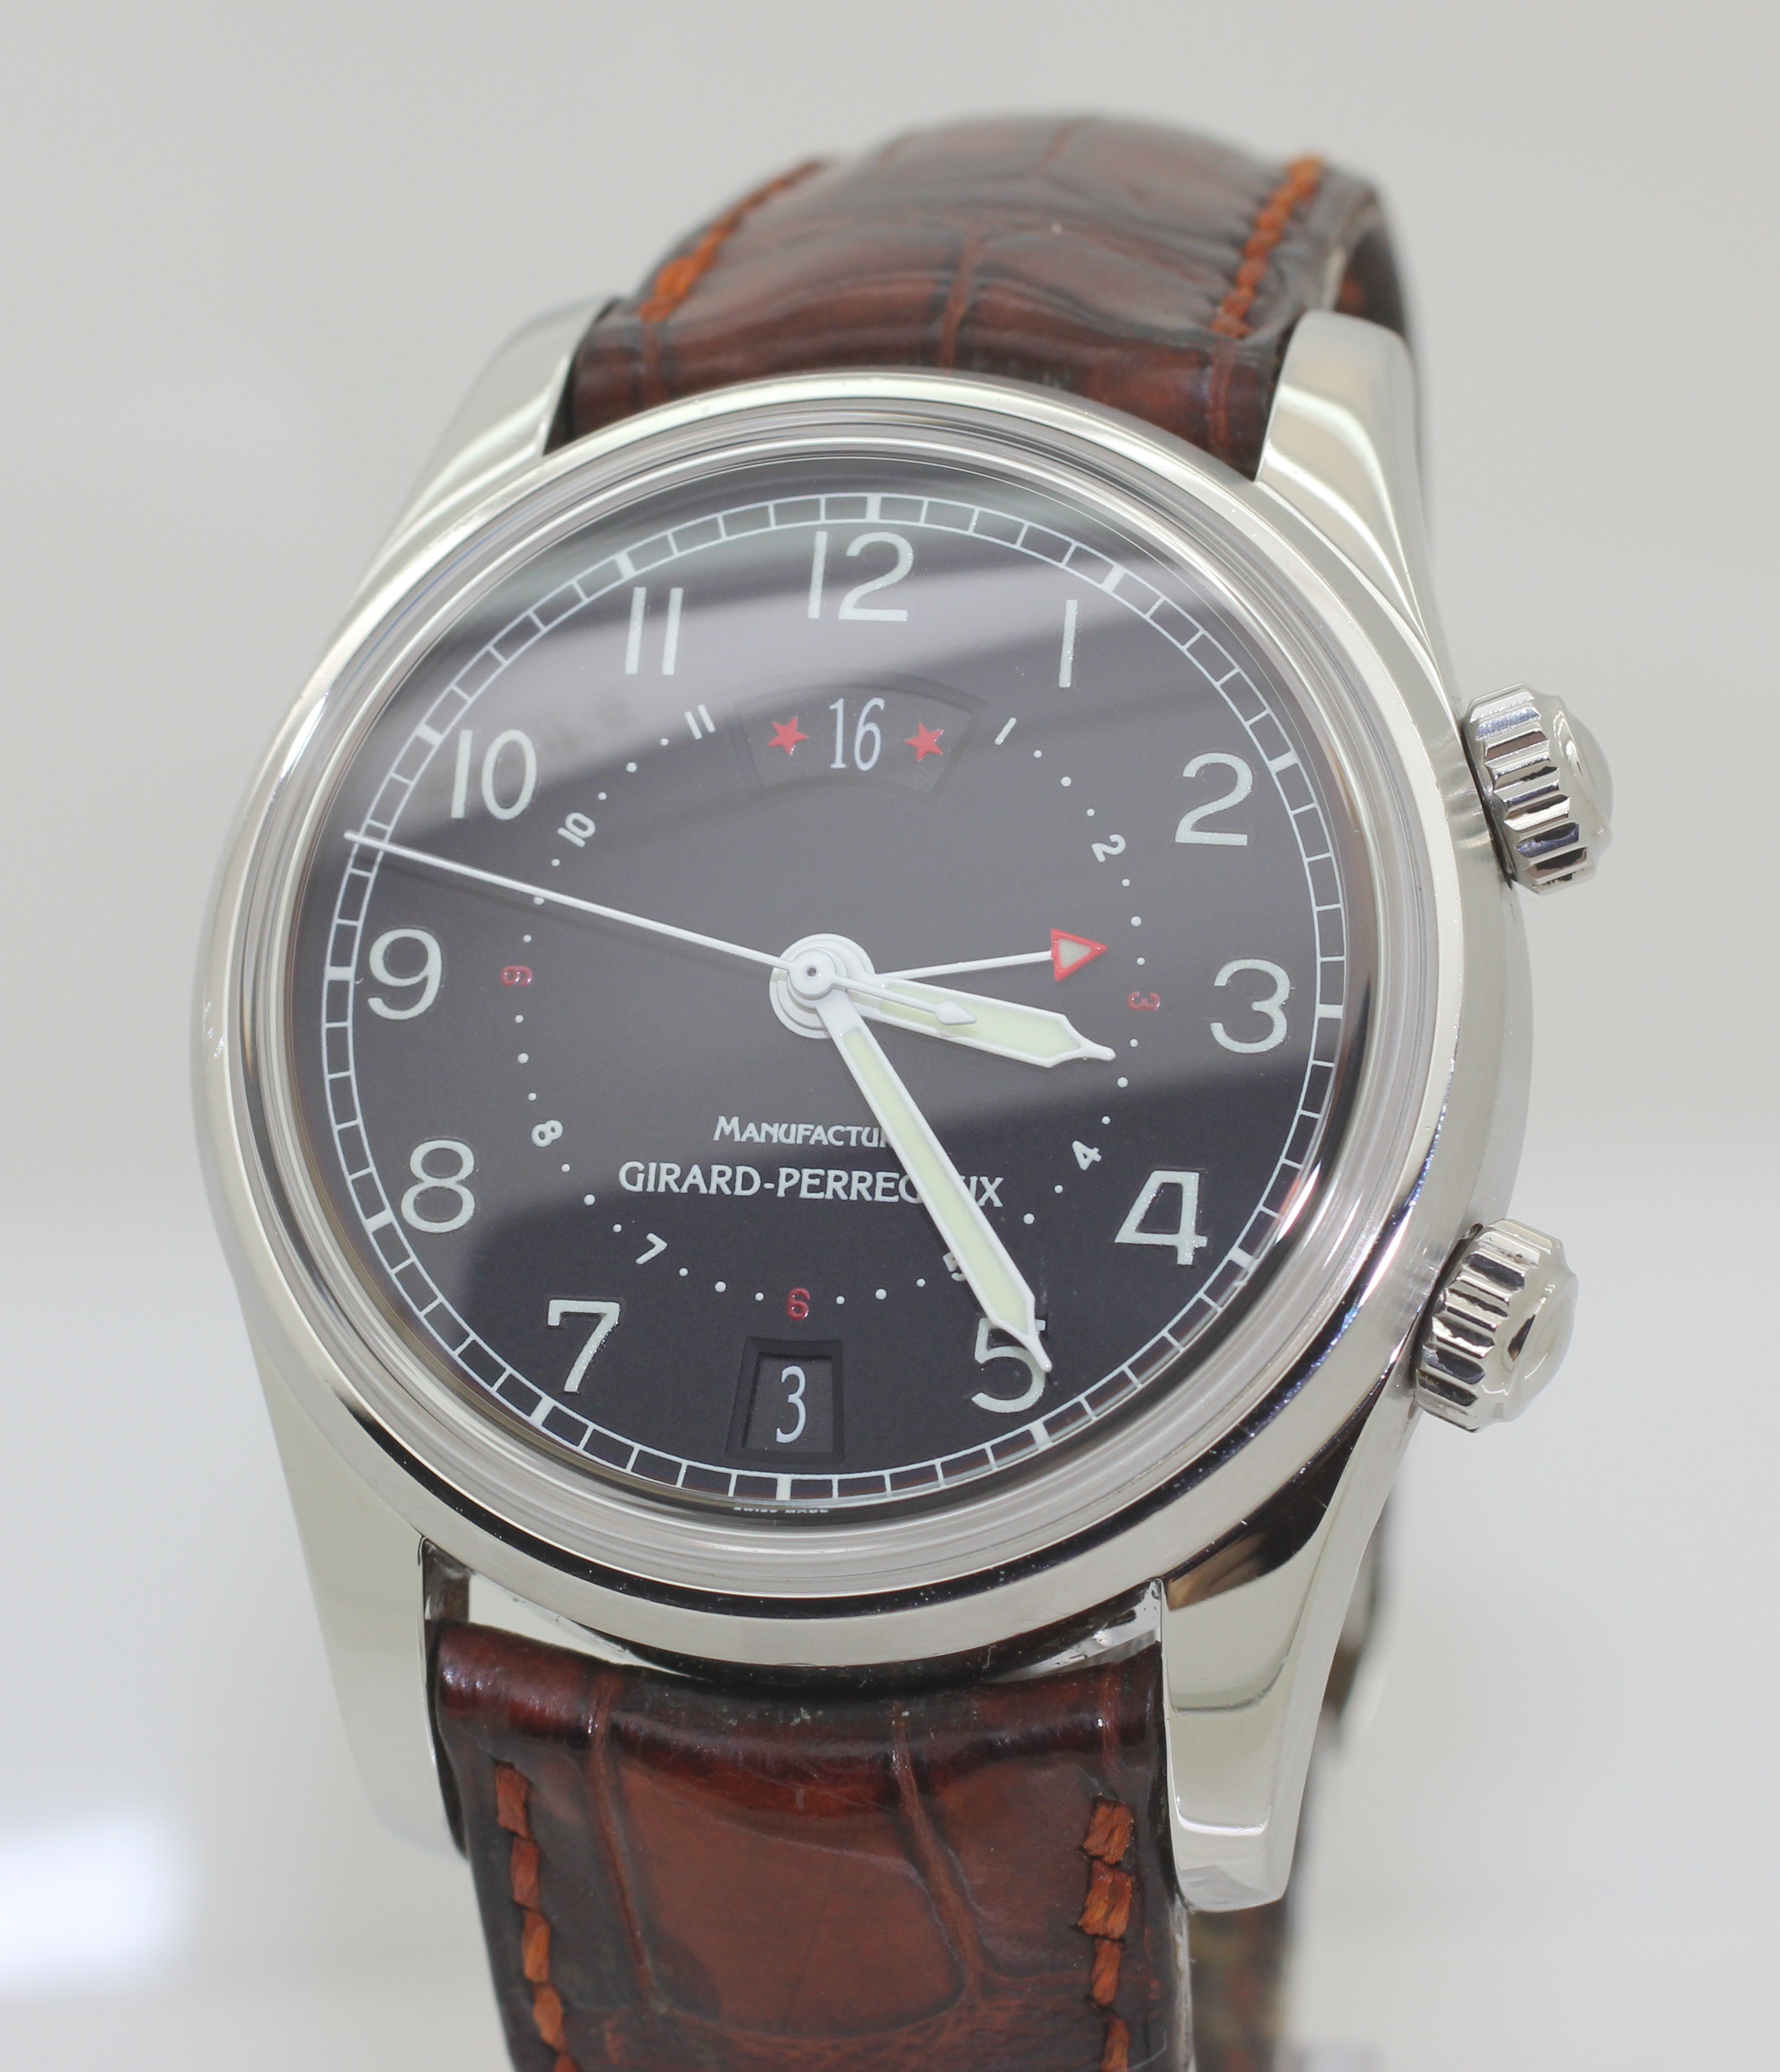 Girard-Perregaux Traveller GMT 4940 Automatic Alarm Watch 38mm - JUST SERVICED